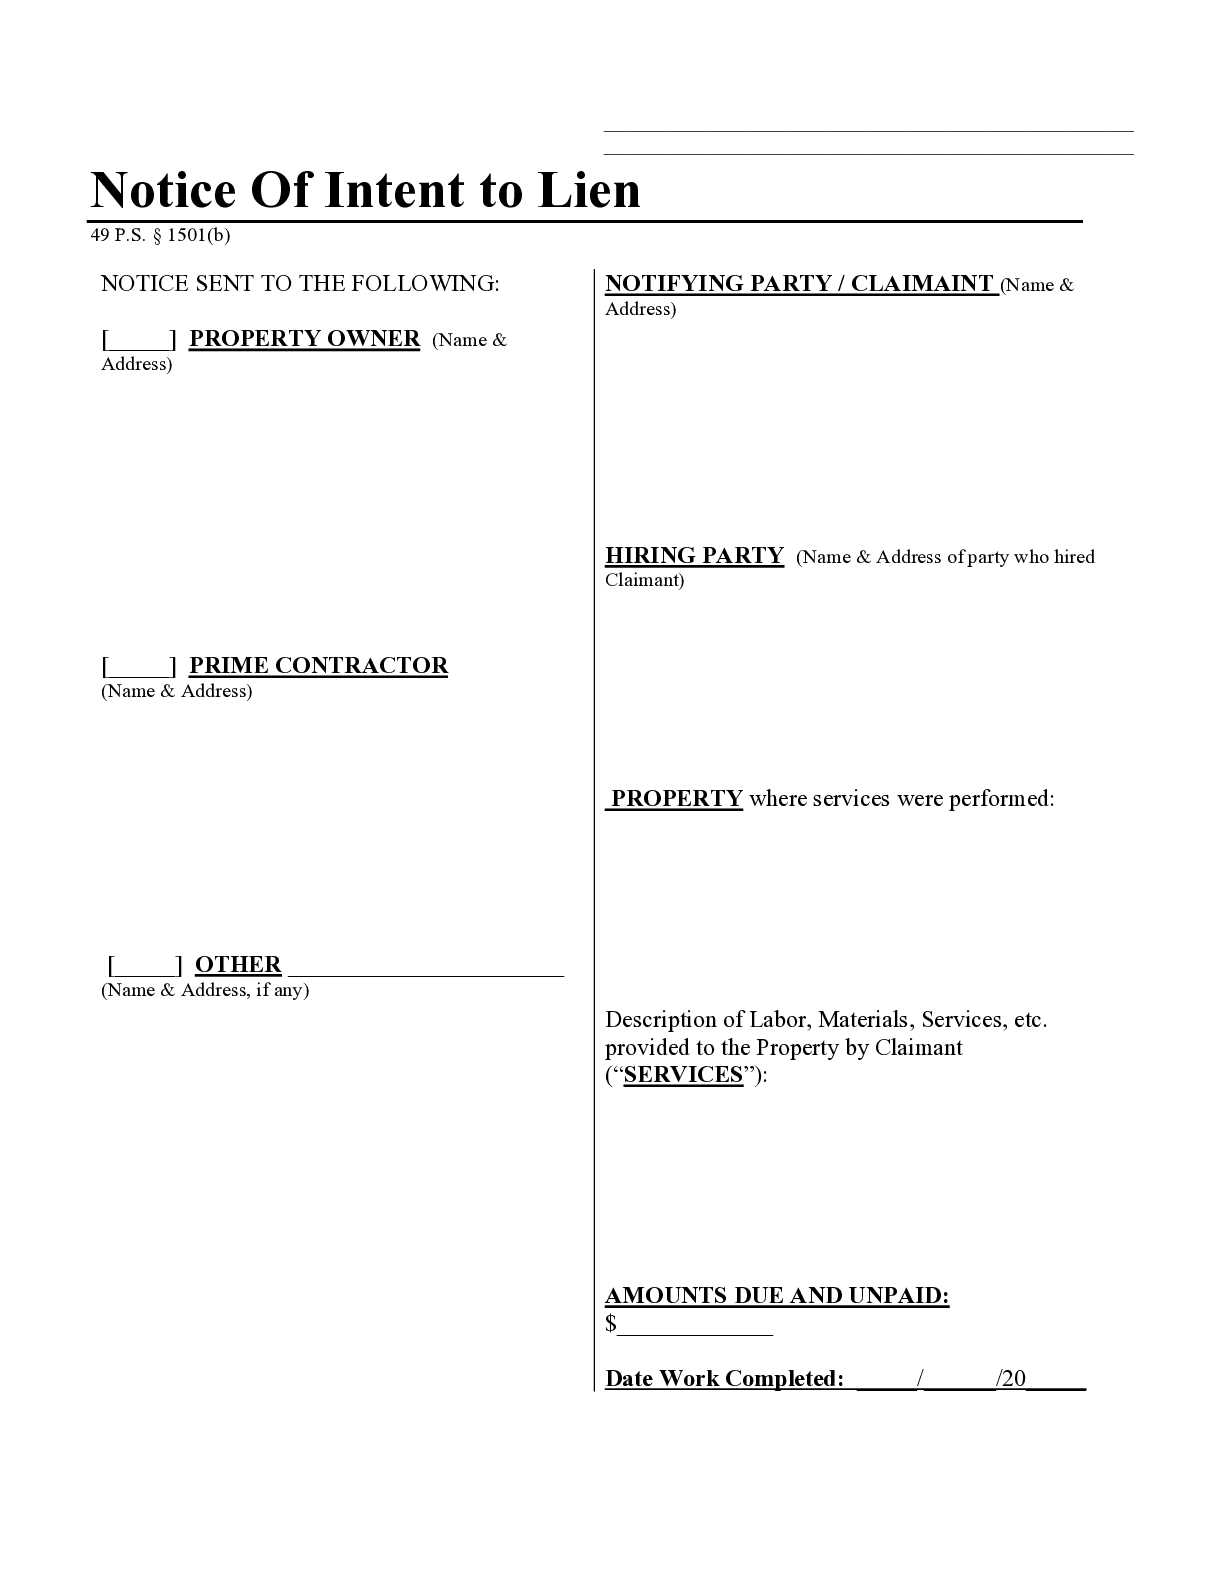 Pennsylvania Notice of Intent to Lien Form | Free Downloadable Template - free from